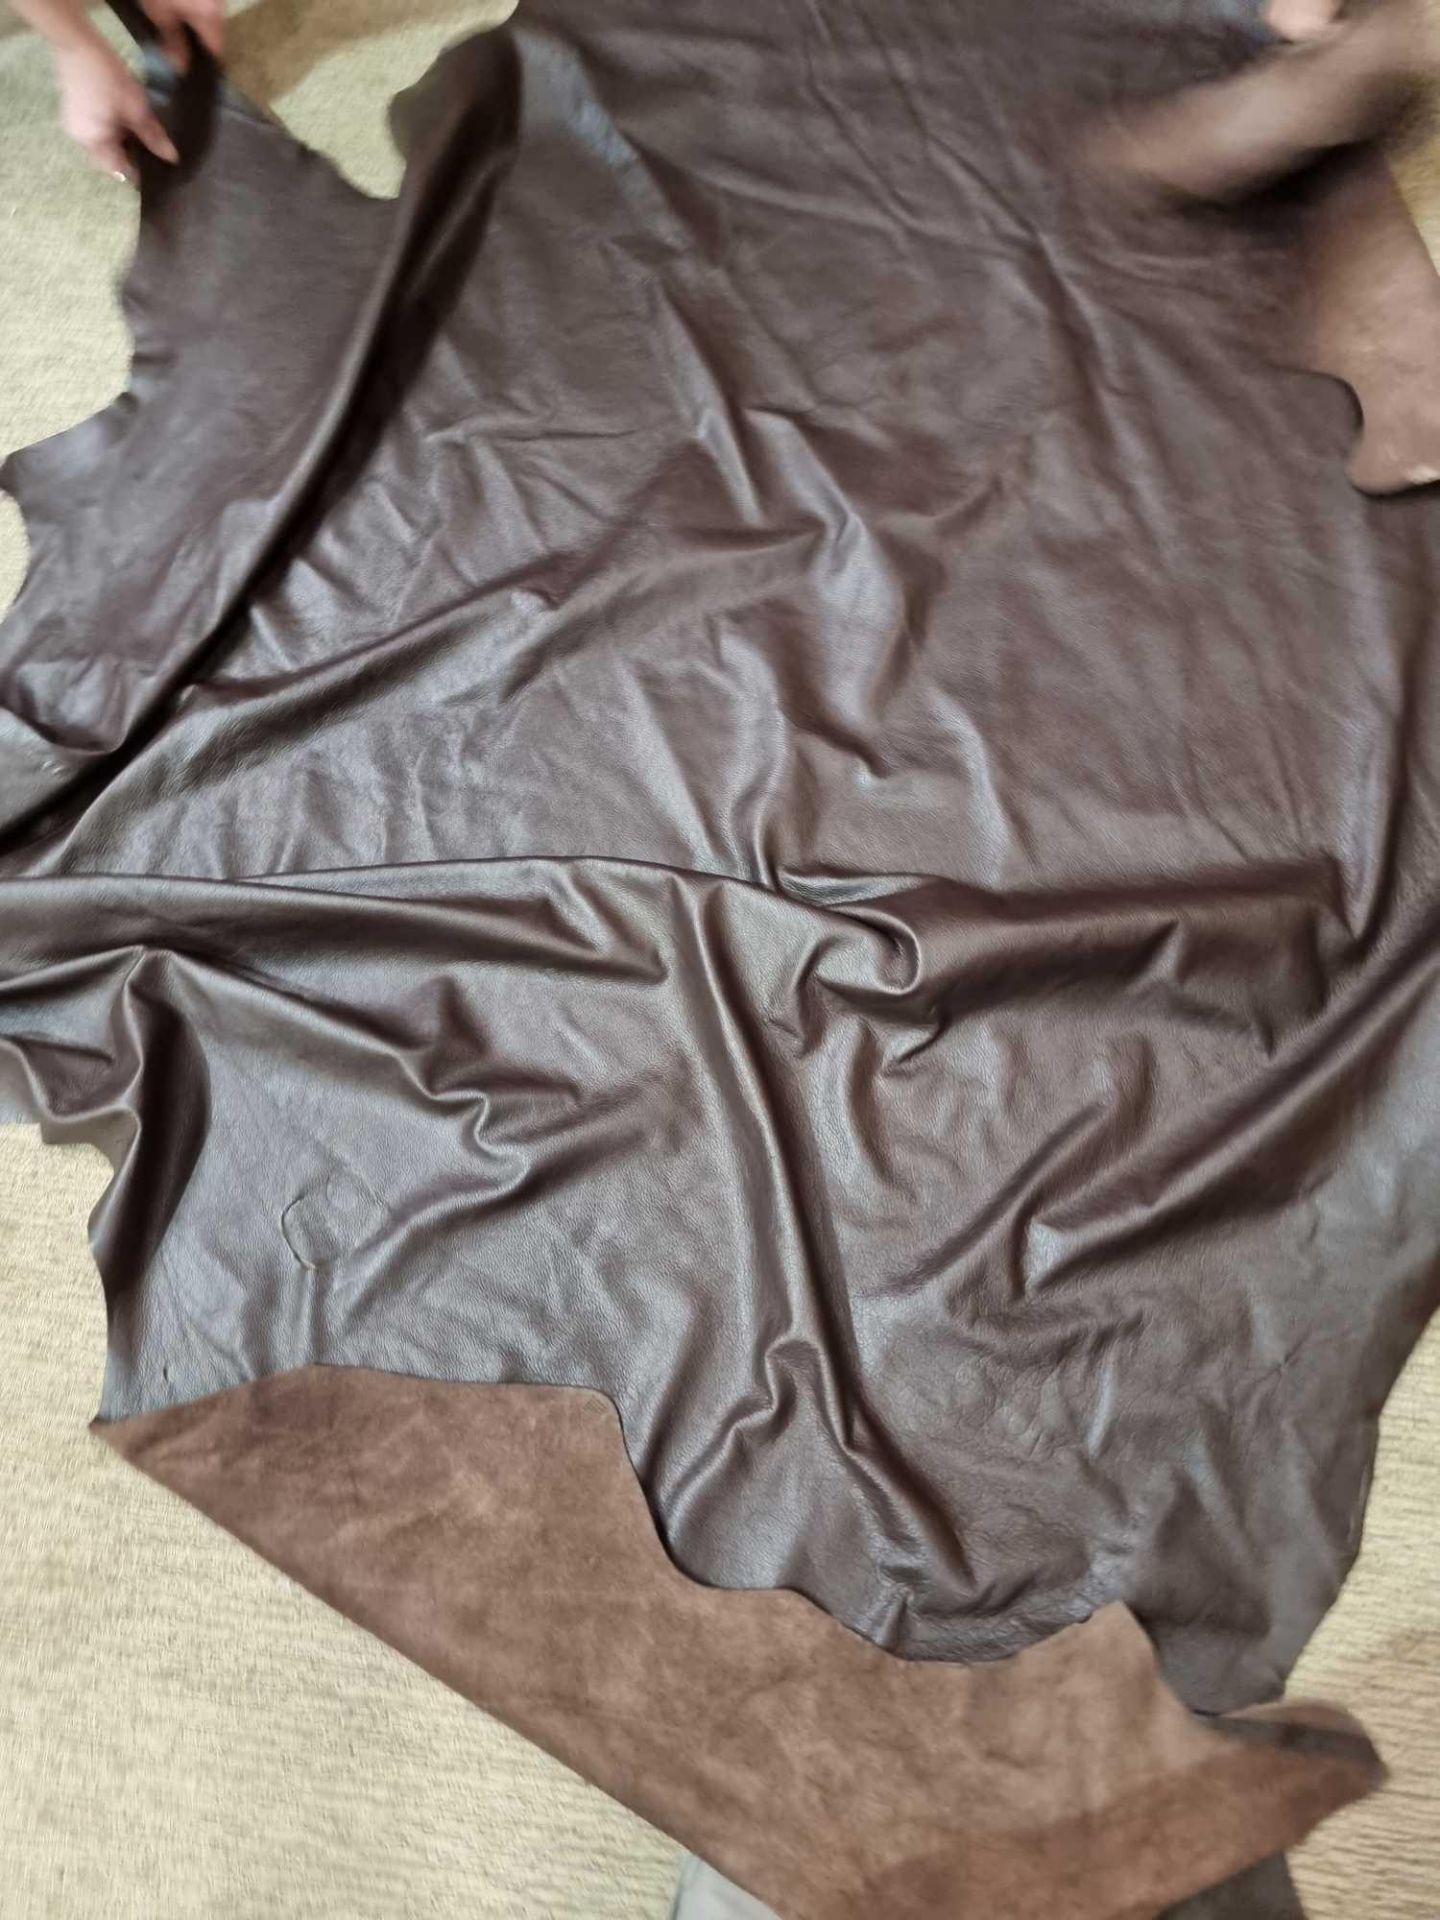 Mastrotto Hudson Chocolate Leather Hide approximately 4.2mÂ² 2.1 x 2cm - Image 2 of 2